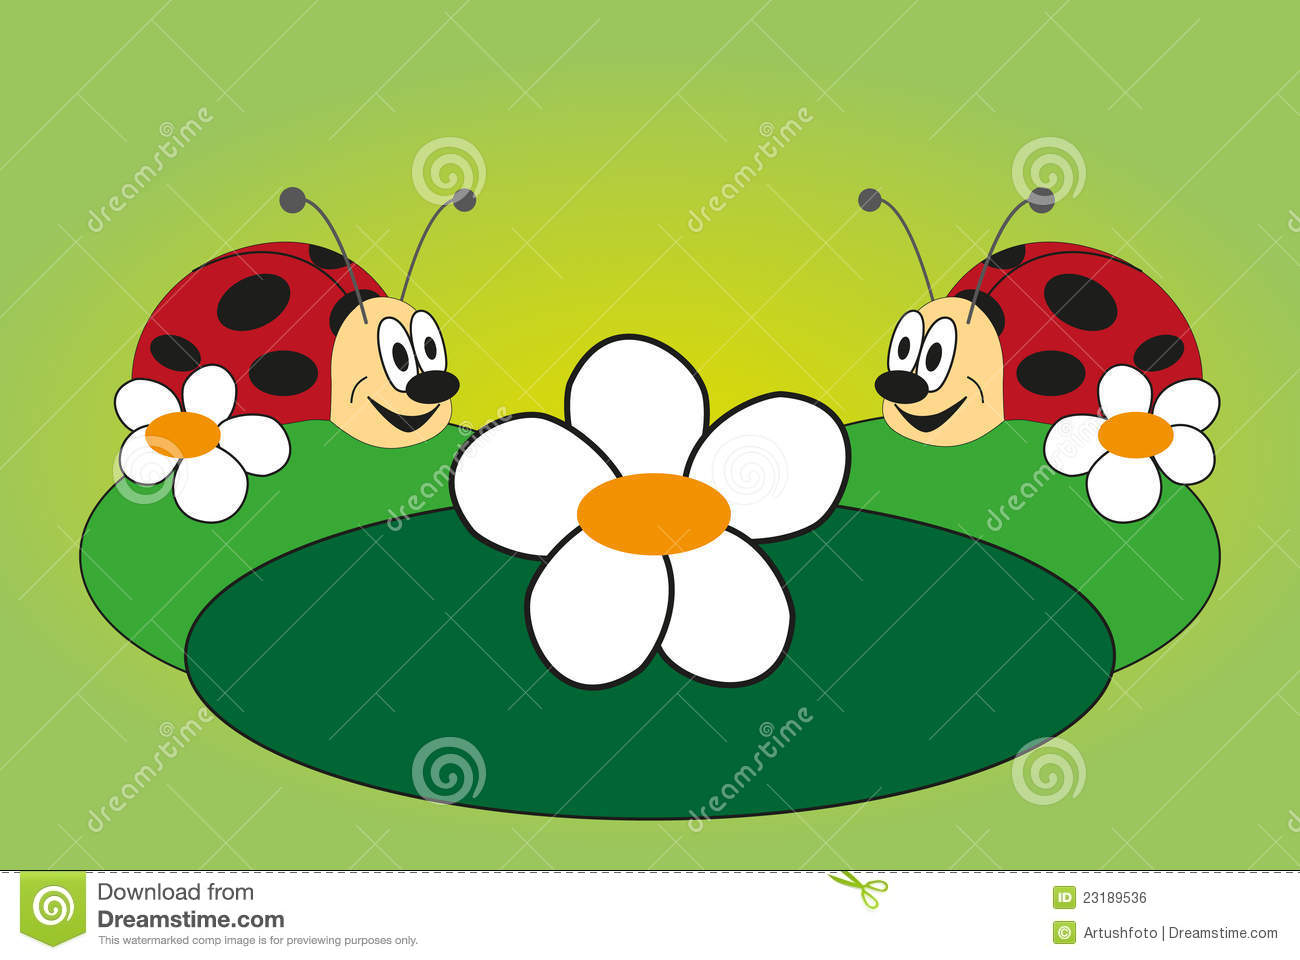 Funny Picture Of Two Ladybug Royalty Free Stock Image   Image